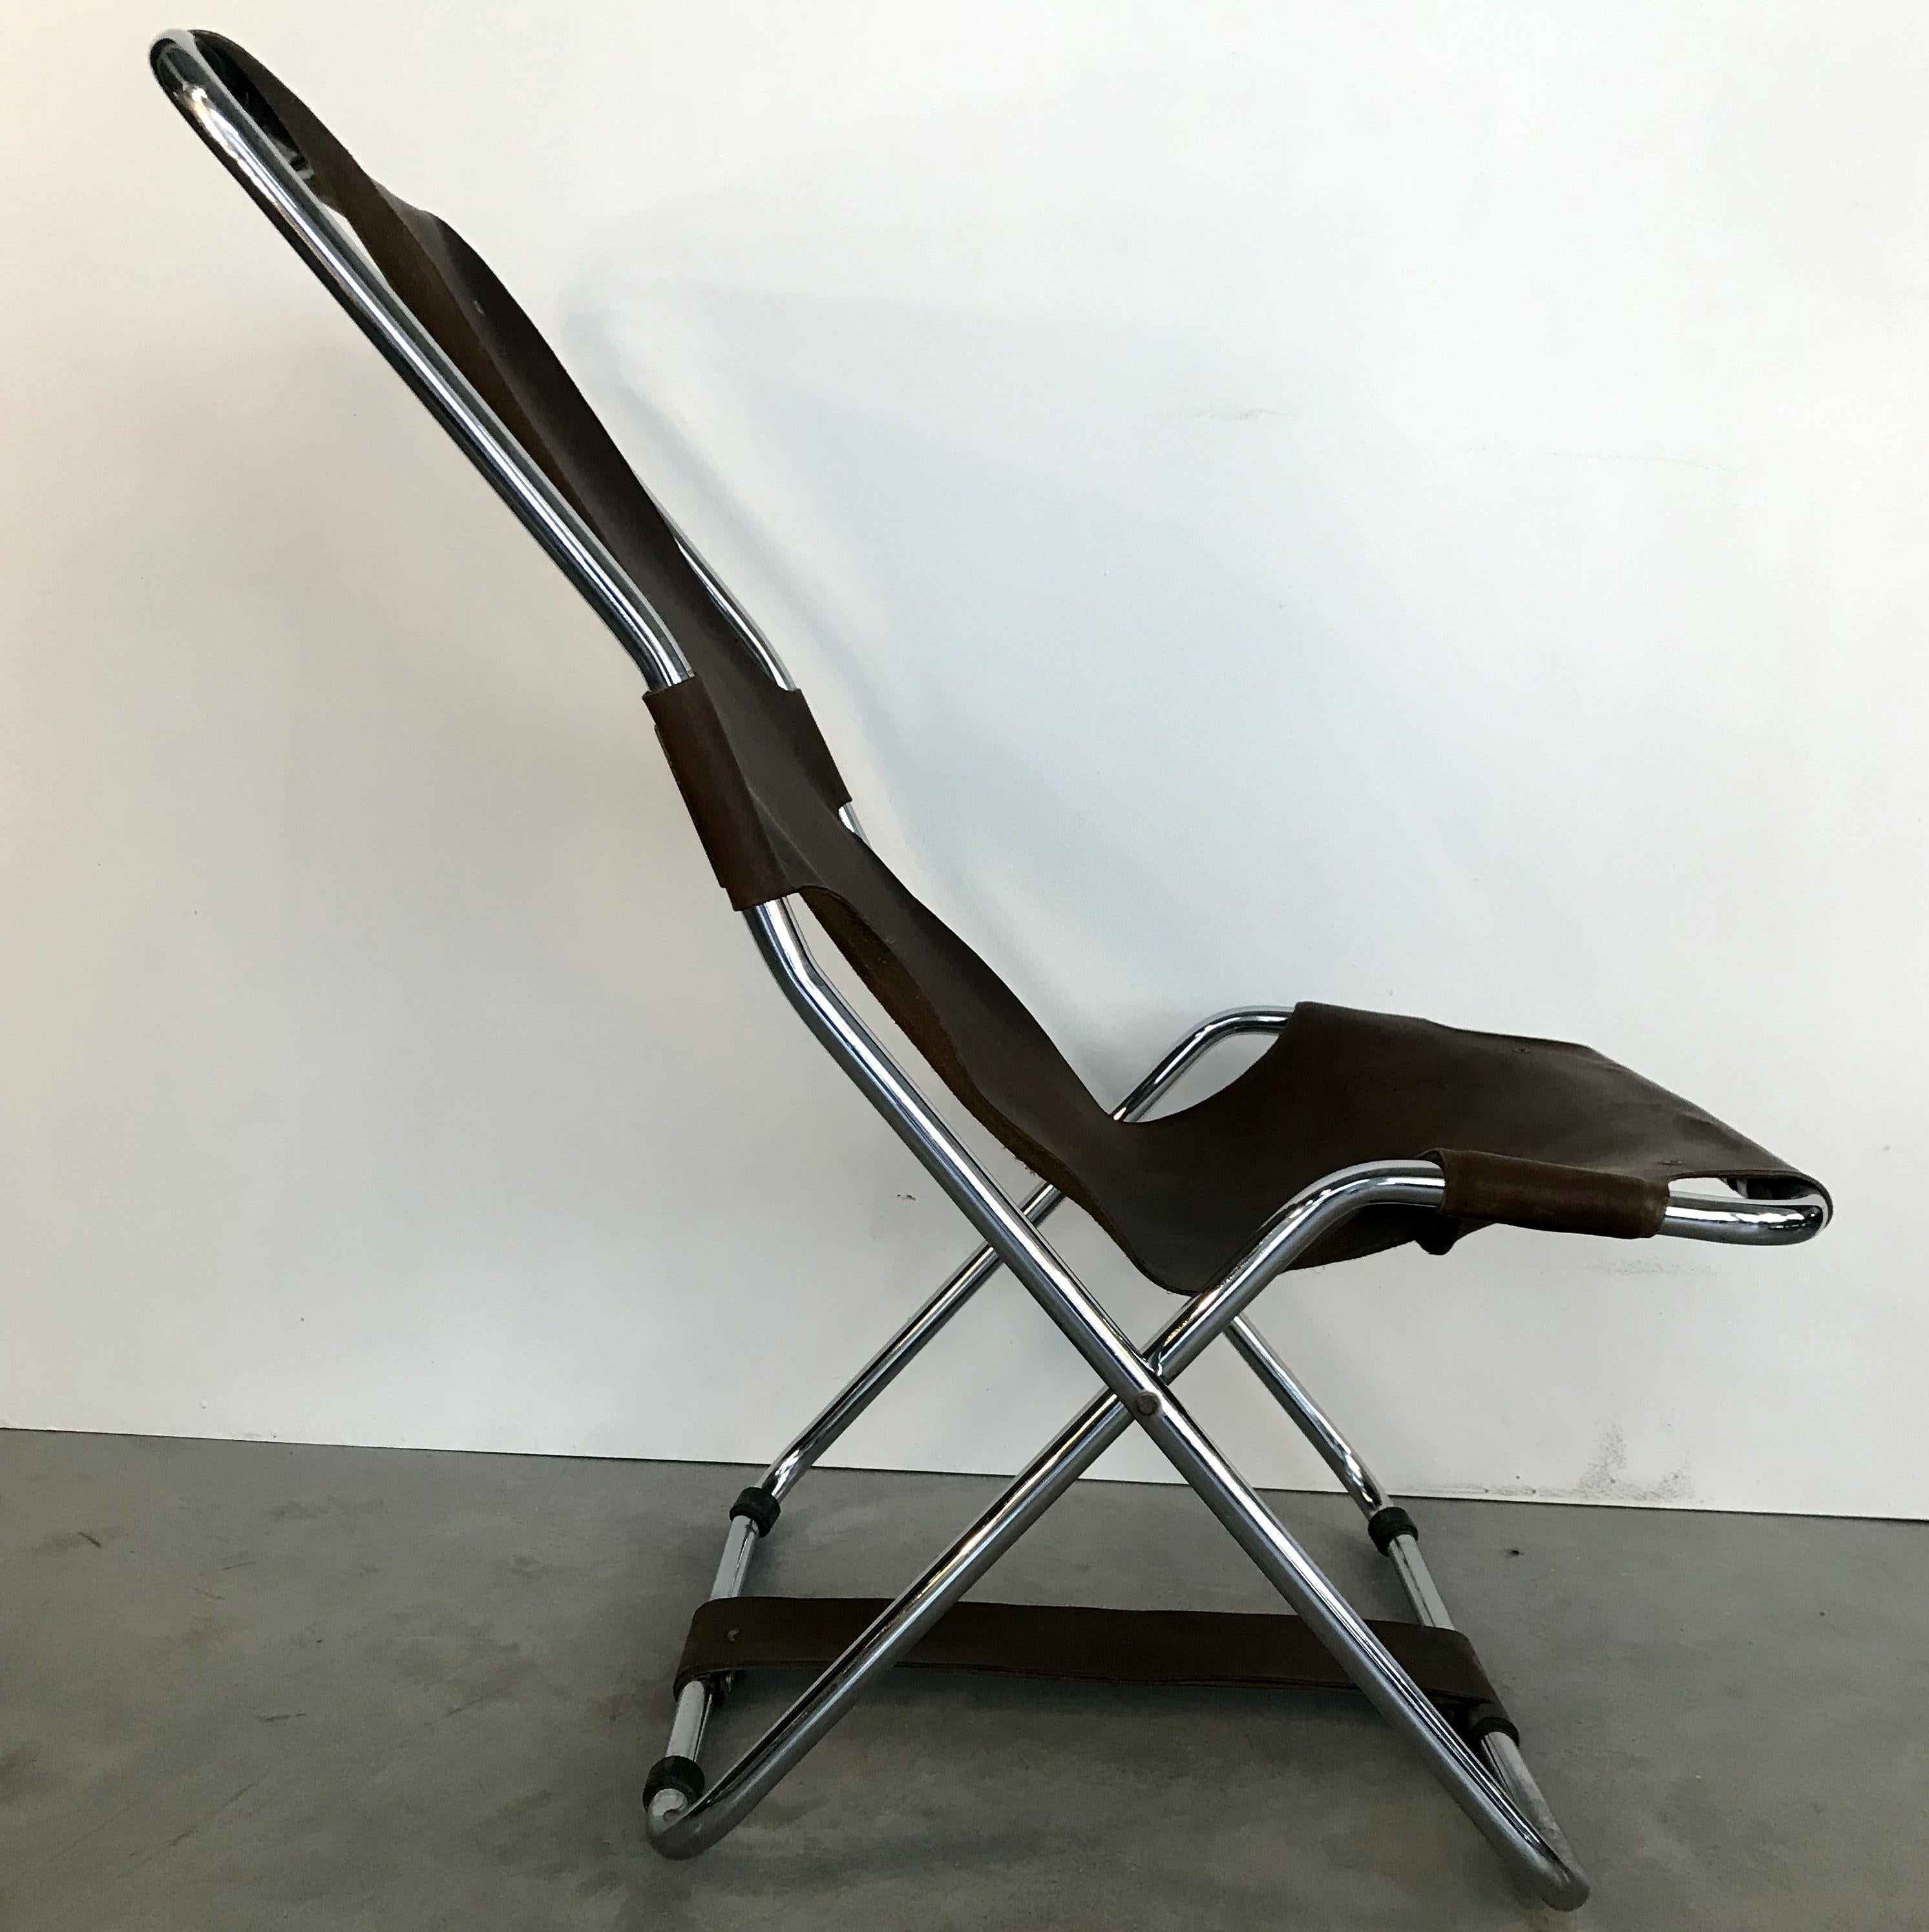 Unique folding lounge chair with original brown leather and polished nickel-plated metal. In good condition.